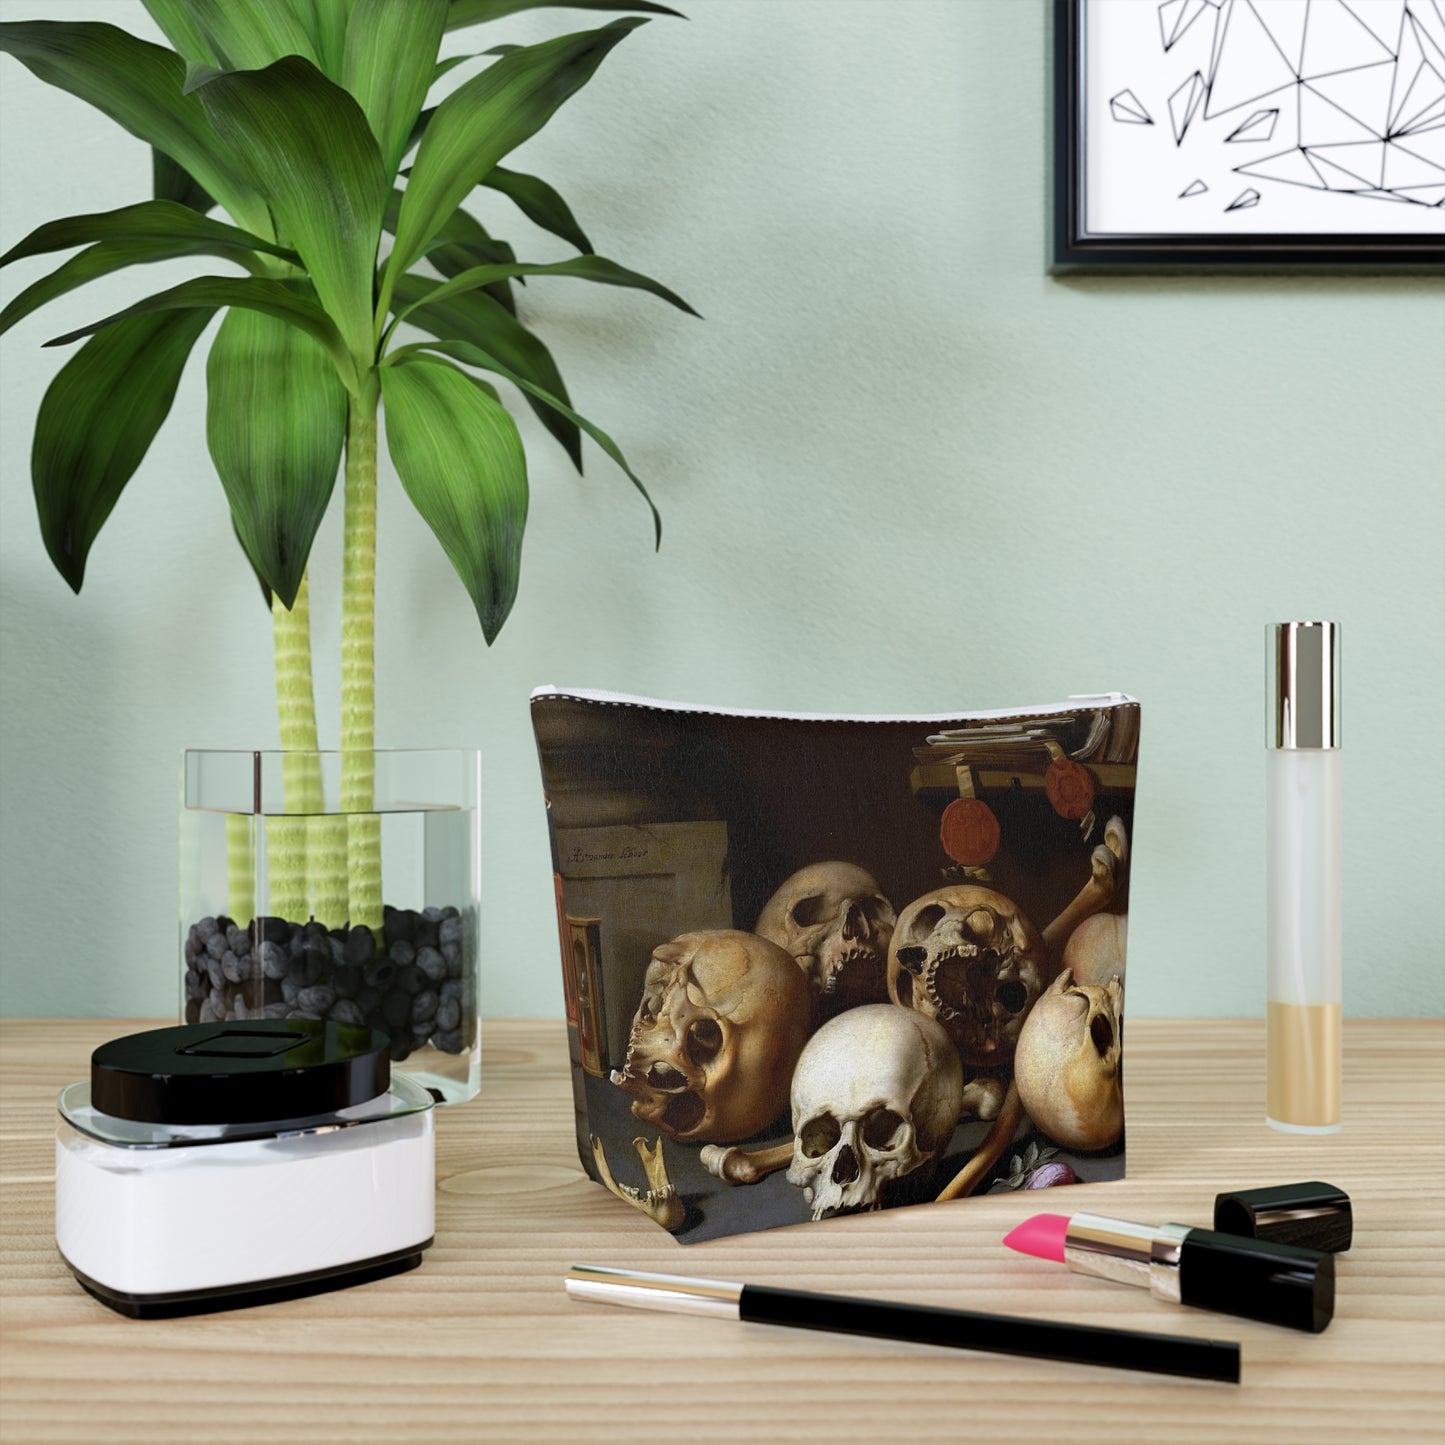 a desk with a plant and a picture of skulls